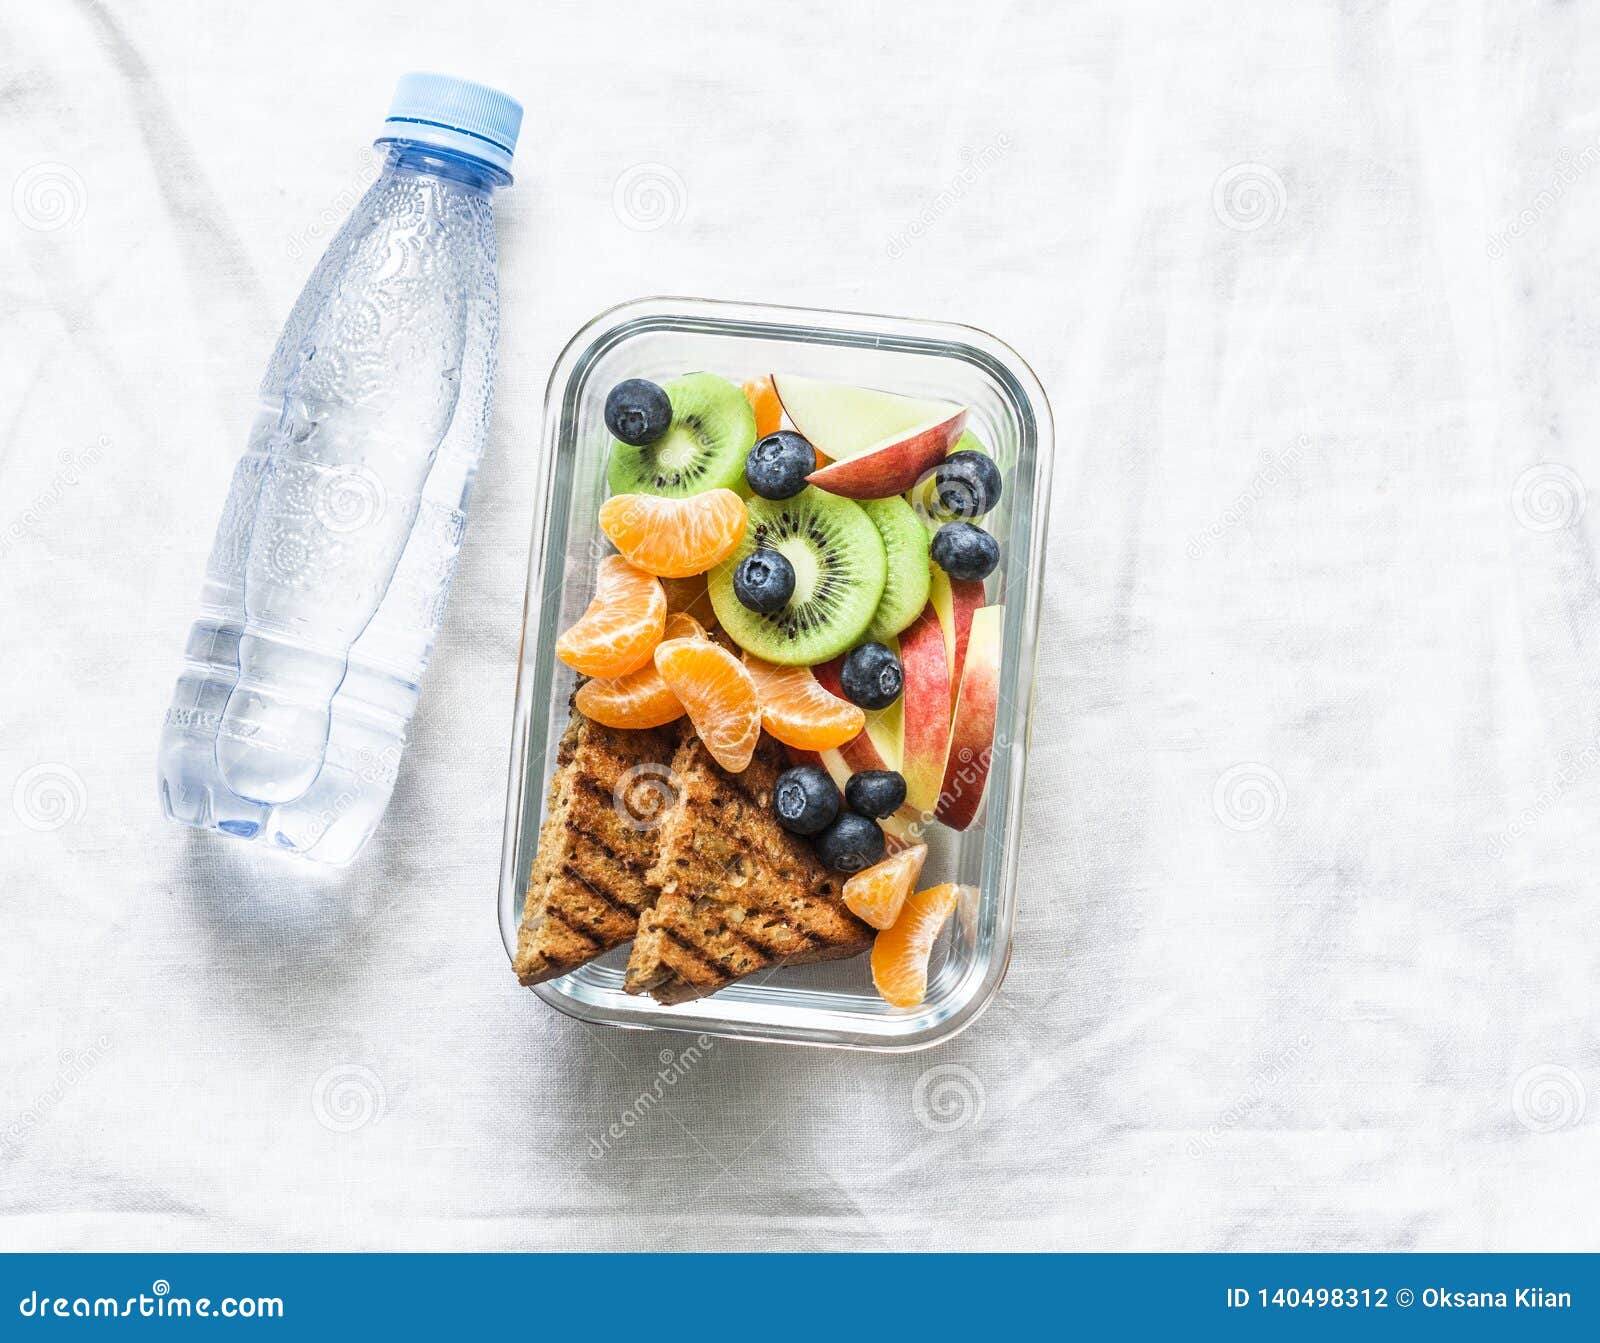 healthy food snack sweet vitamin lunch box and bottle of clean water on a light background. peanut butter toast, apples